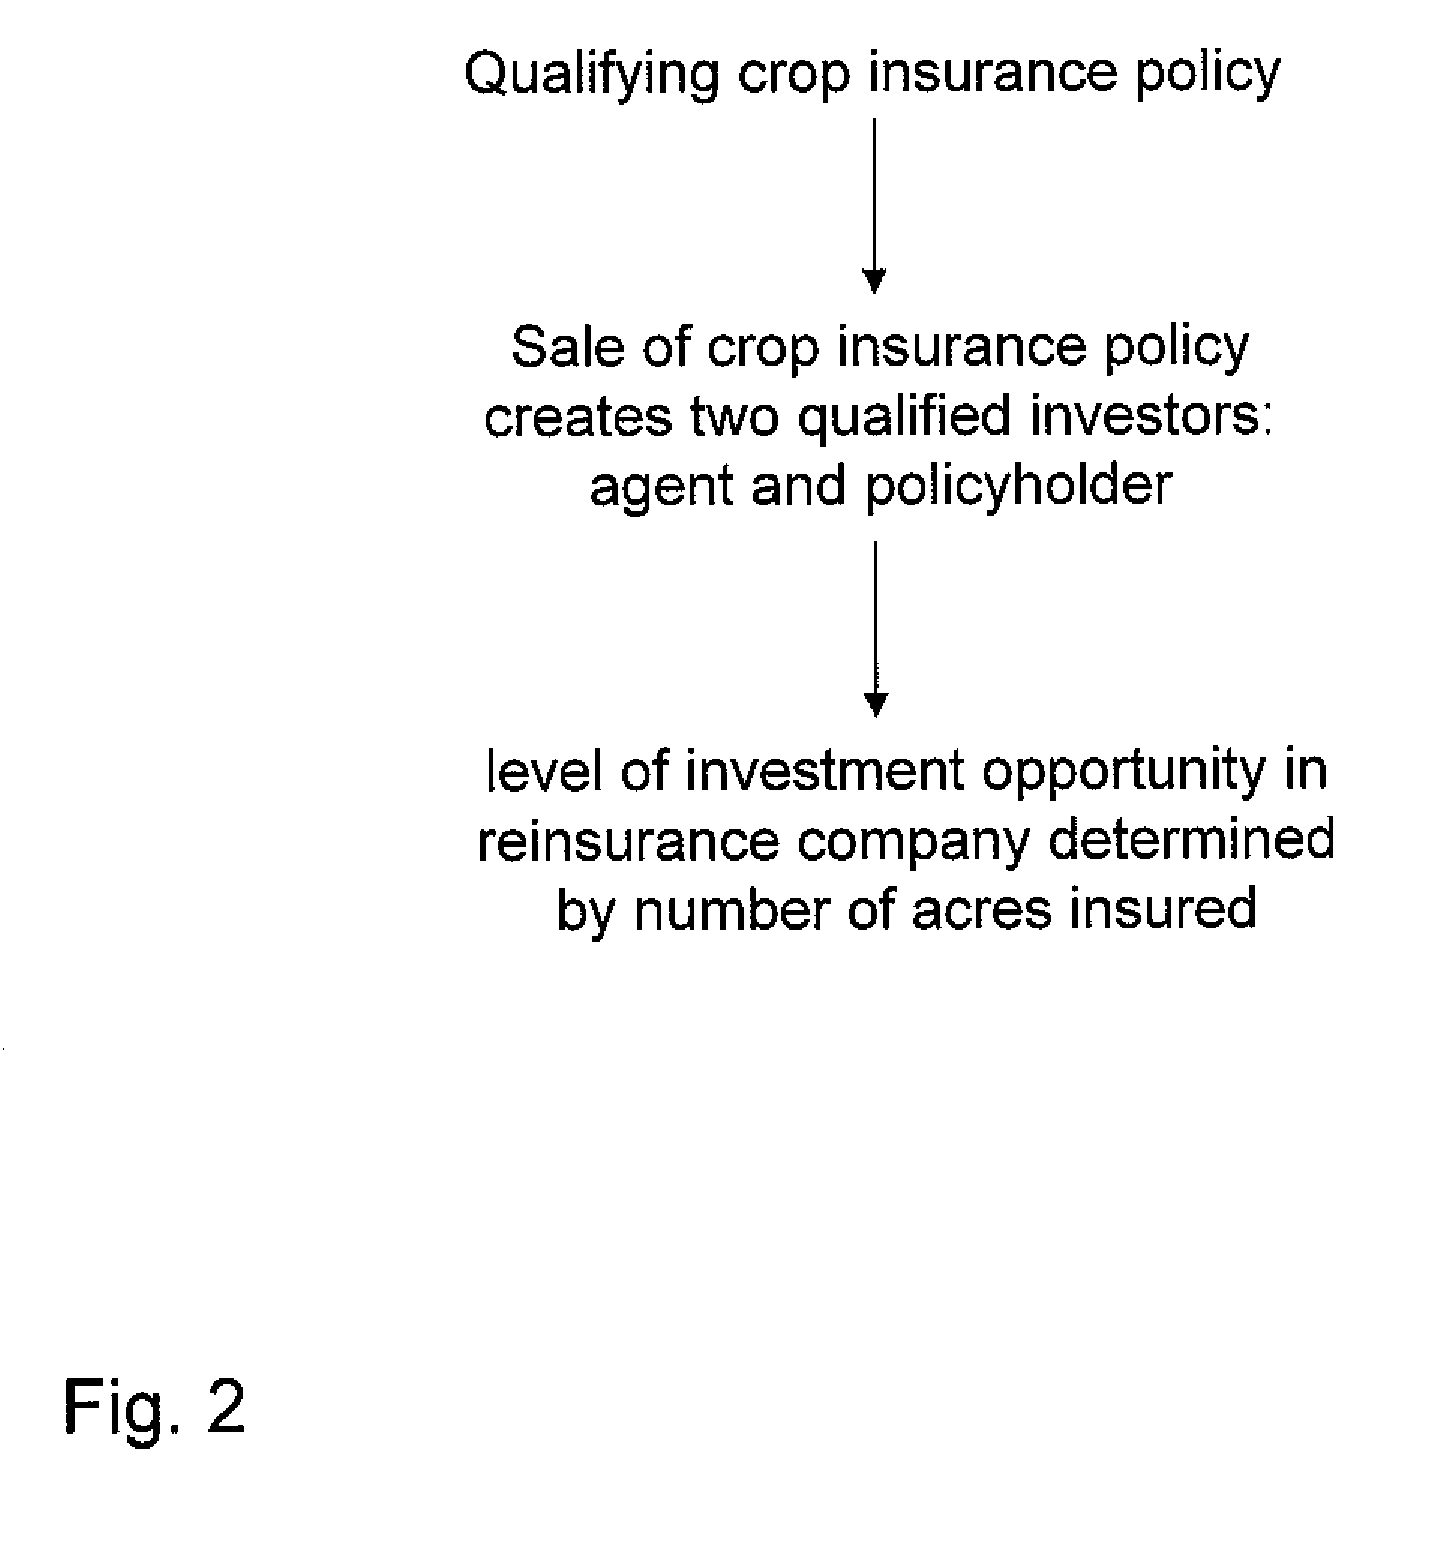 Method for determining and maintaining eligibility for investors in a crop reinsurance company